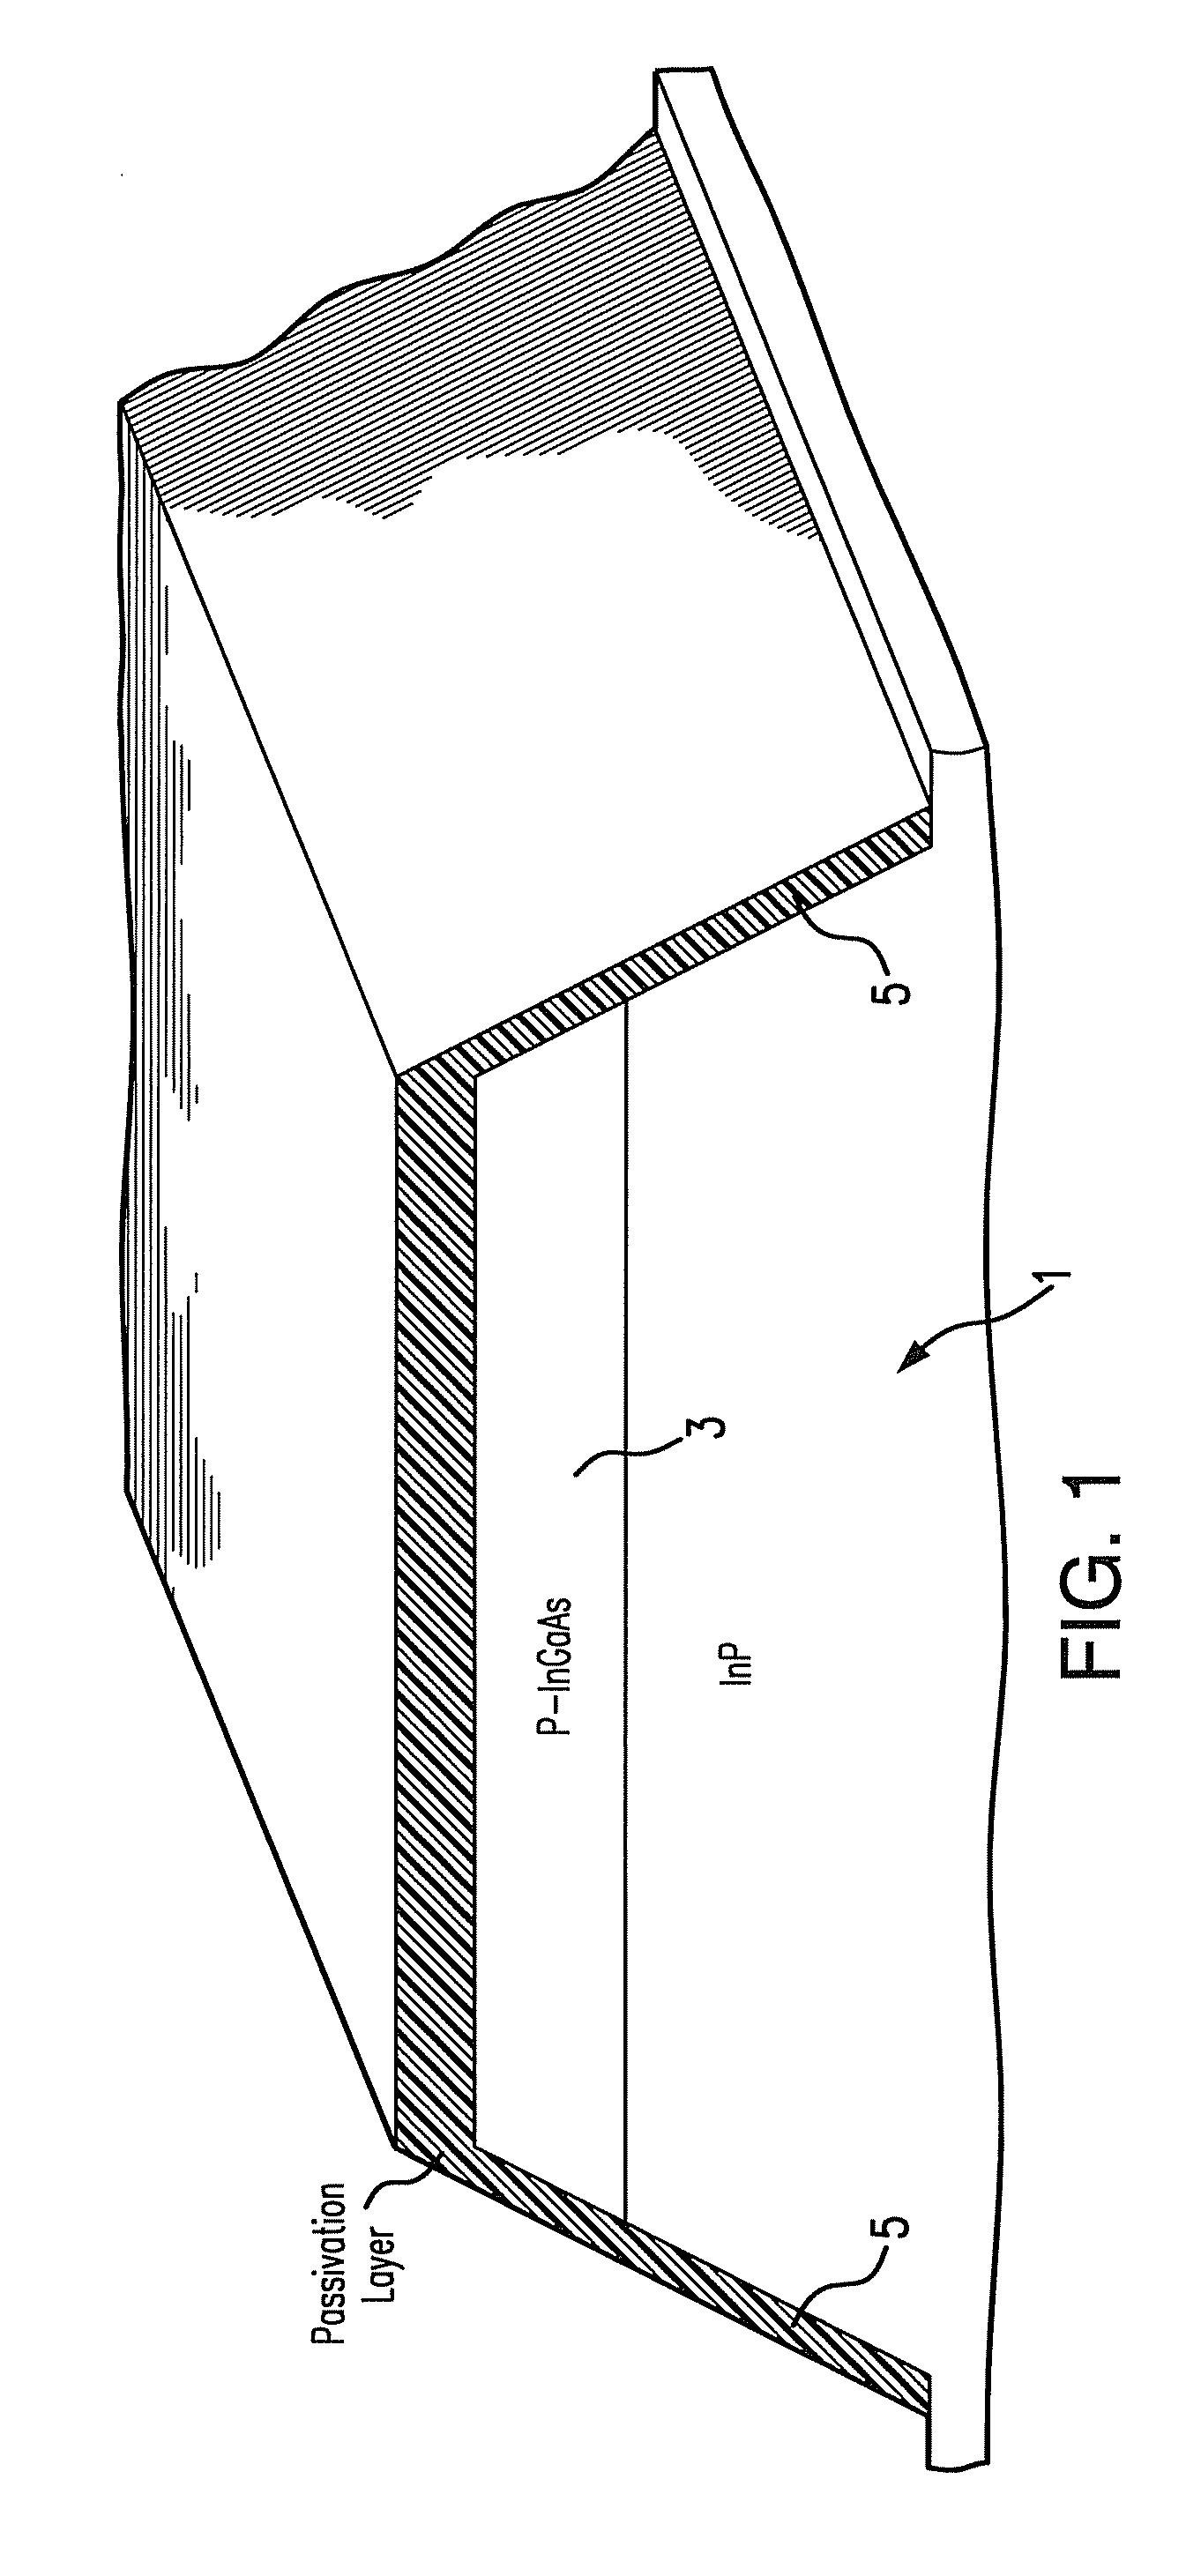 Conformal metallization process for the fabrication of semiconductor laser devices